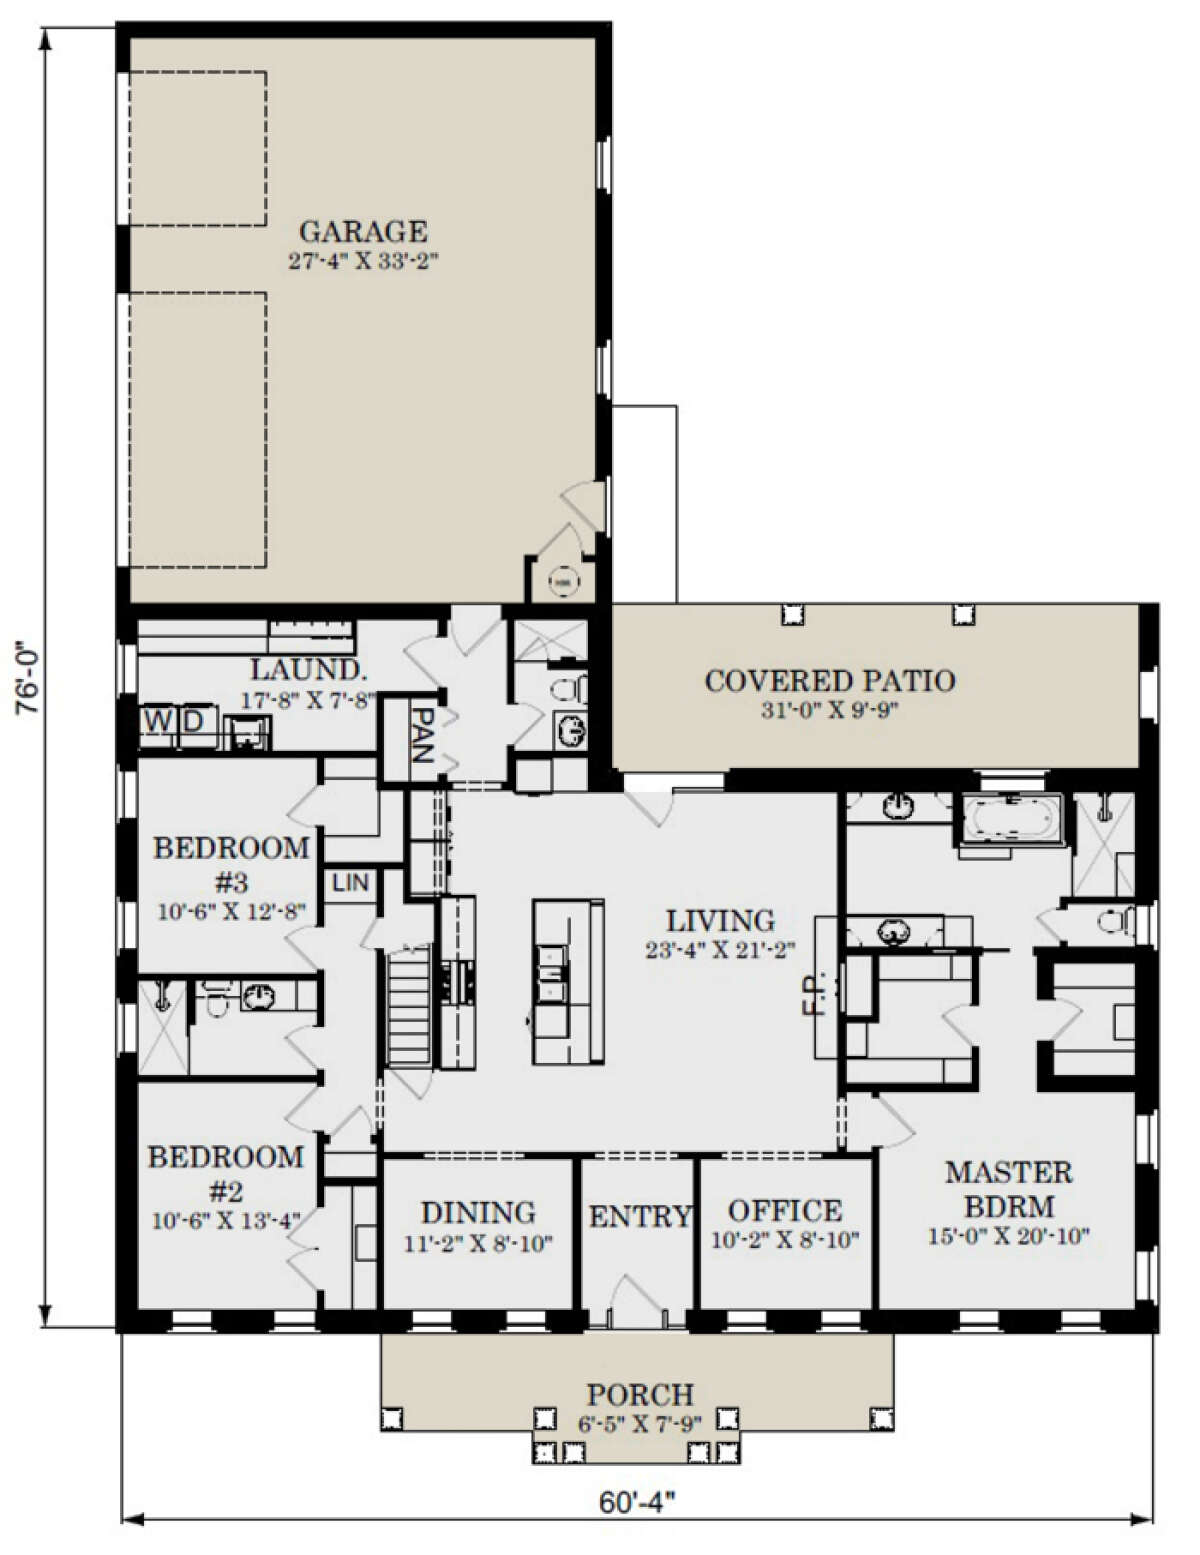 Traditional Plan: 2,028 Square Feet, 3 Bedrooms, 2 Bathrooms - 098-00084